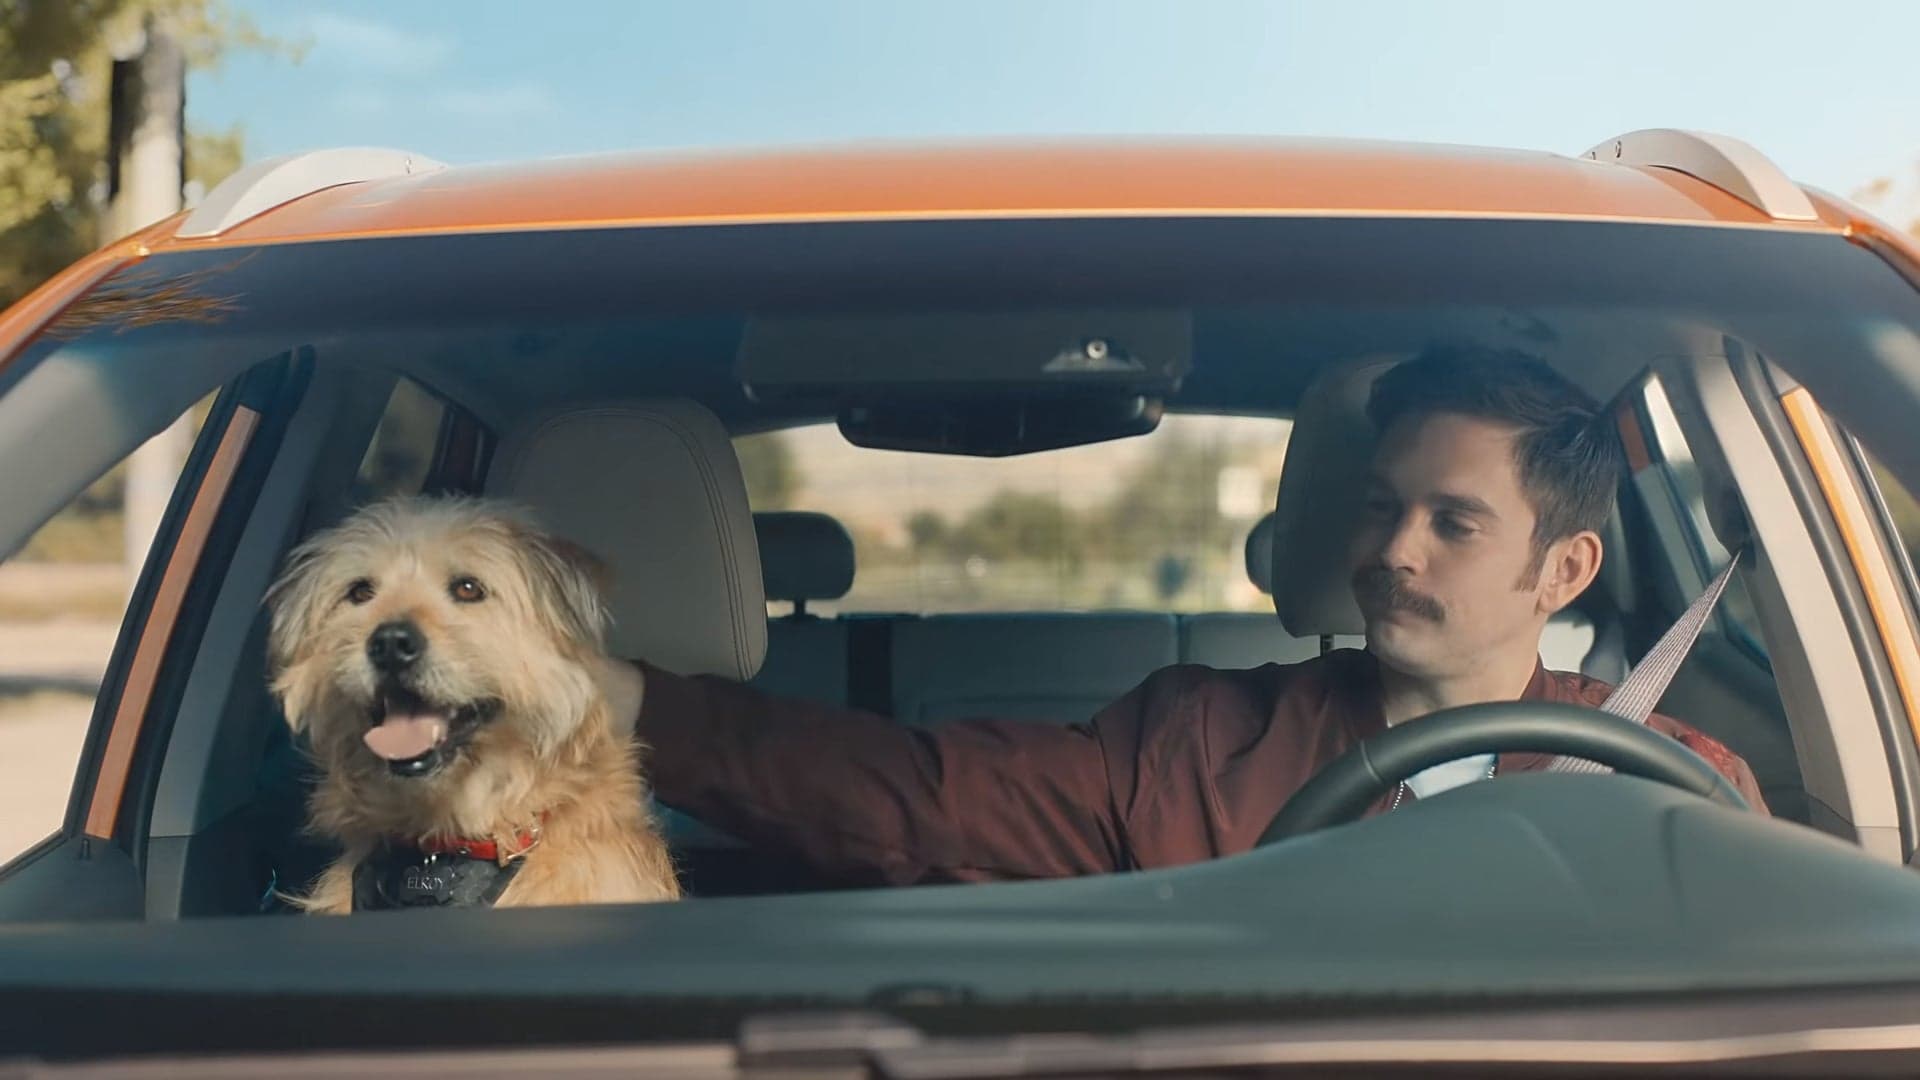 Volkswagen and Electrify America Launch New EV Ads Featuring a Chevy Bolt